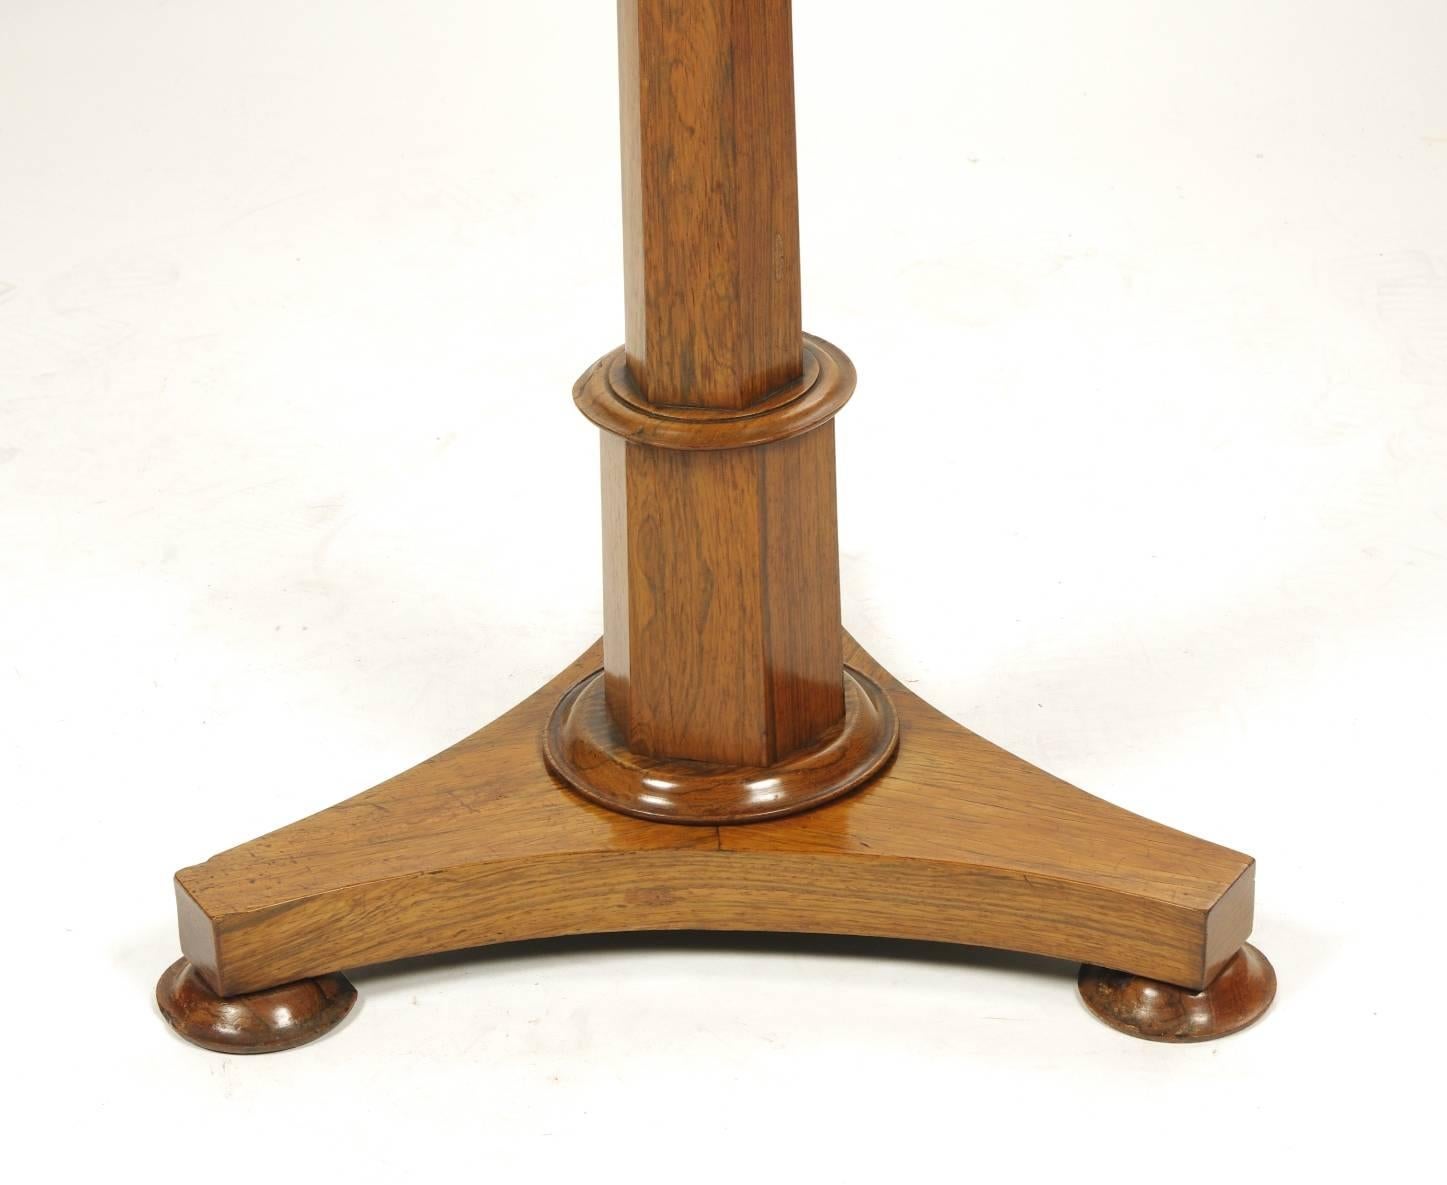 English Regency Rosewood Small Games Table, circa 1820